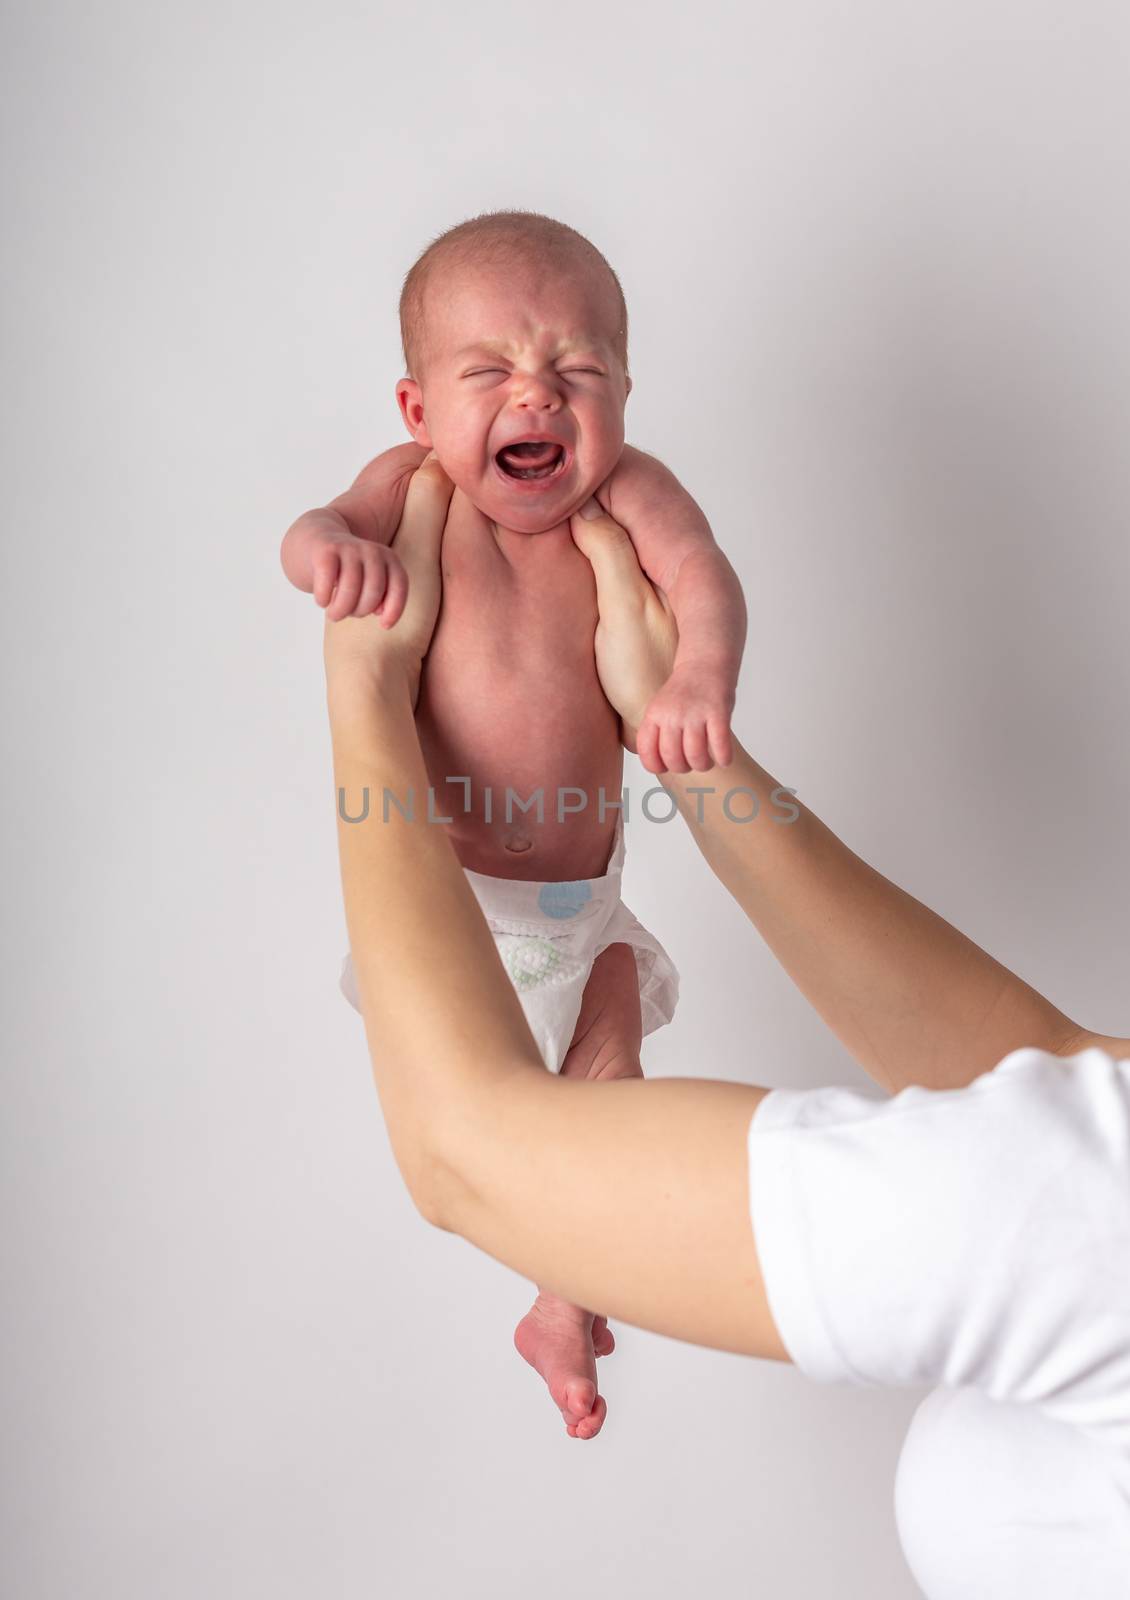 Portrait of a screaming newborn hold at hands, family, healthy birth concept photo, close up.